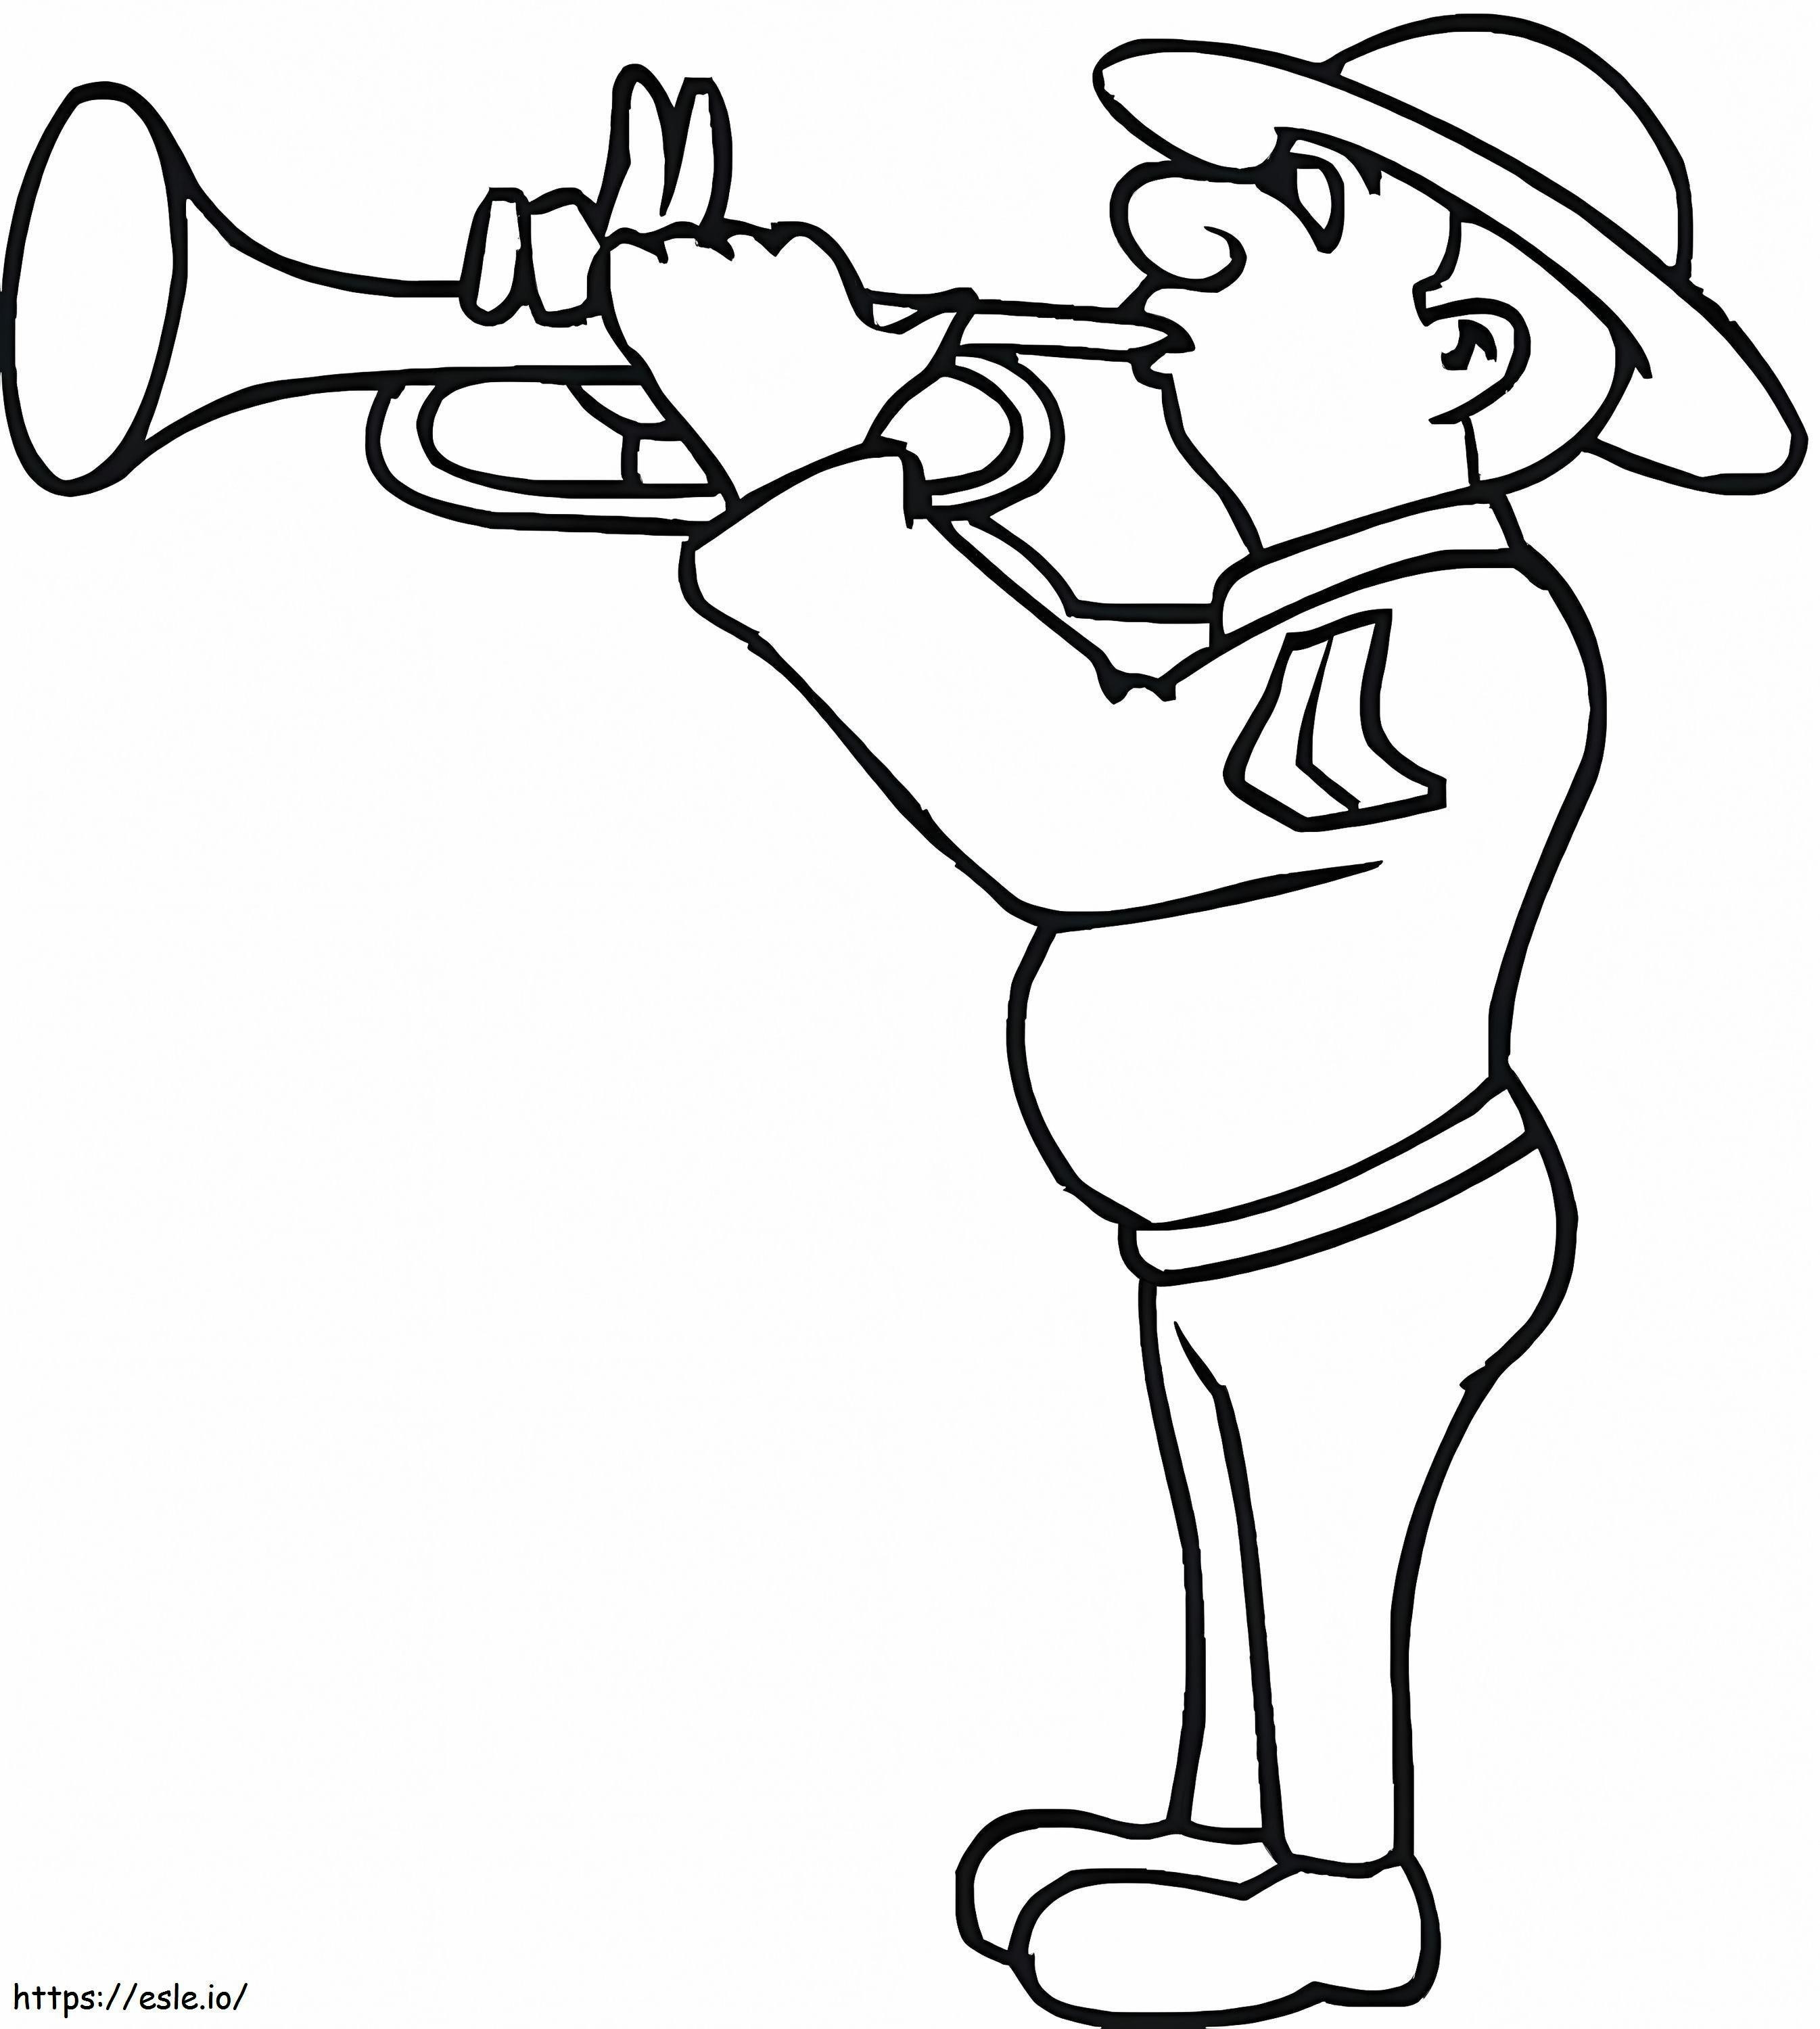 Man On Veterans Day coloring page